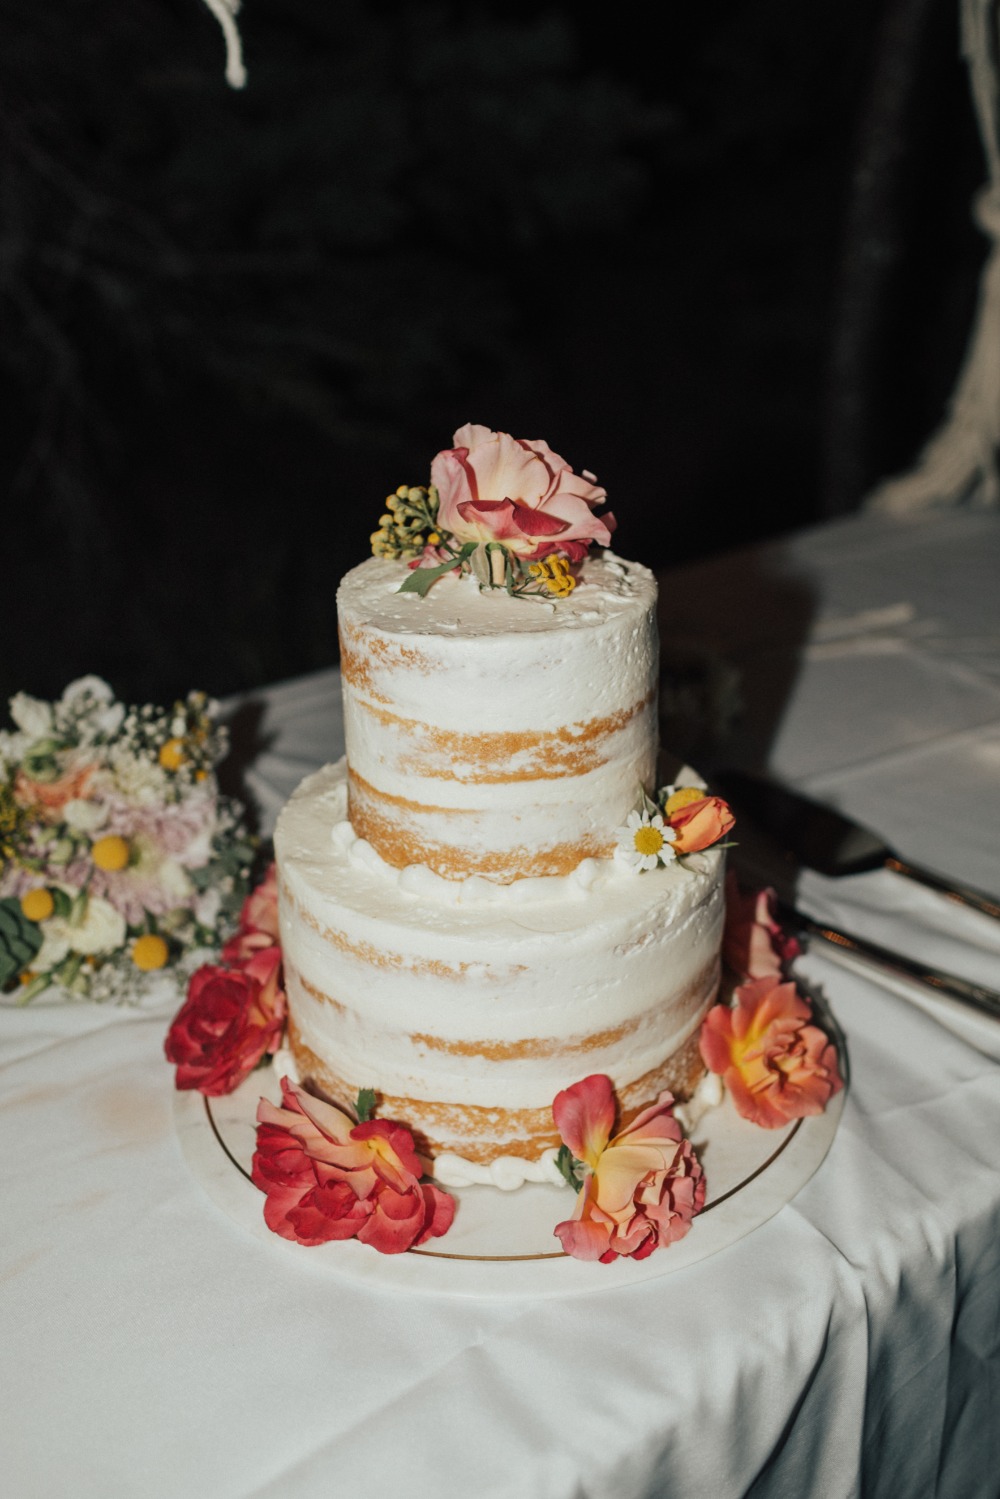 Naked cake with DIY florals added